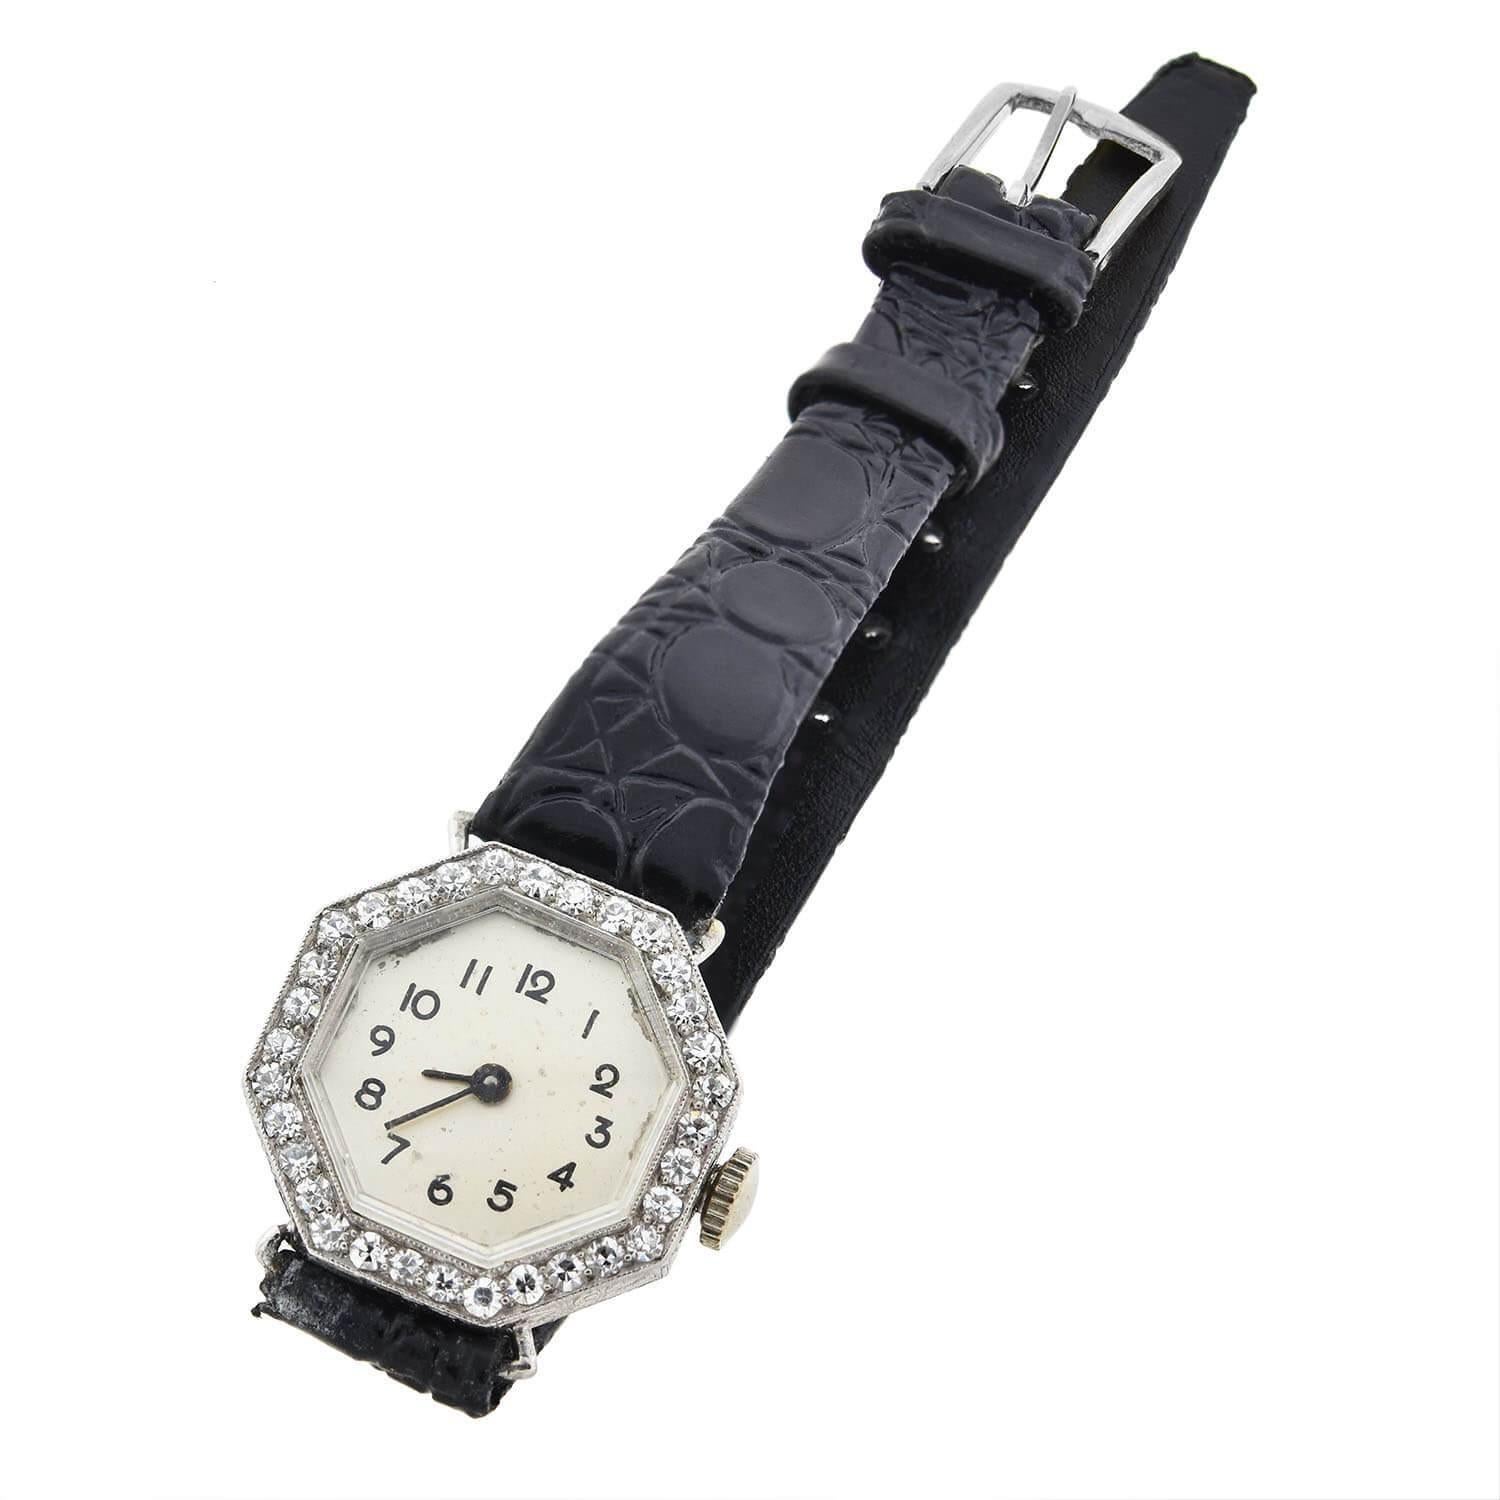 A very stylish platinum and diamond watch from the Art Deco (ca1920s) era! This stunning timepiece features a flat octagonal face set in a sleek platinum encasement. Sparkling diamonds line the uniquely shaped face, each micro-prong set within the